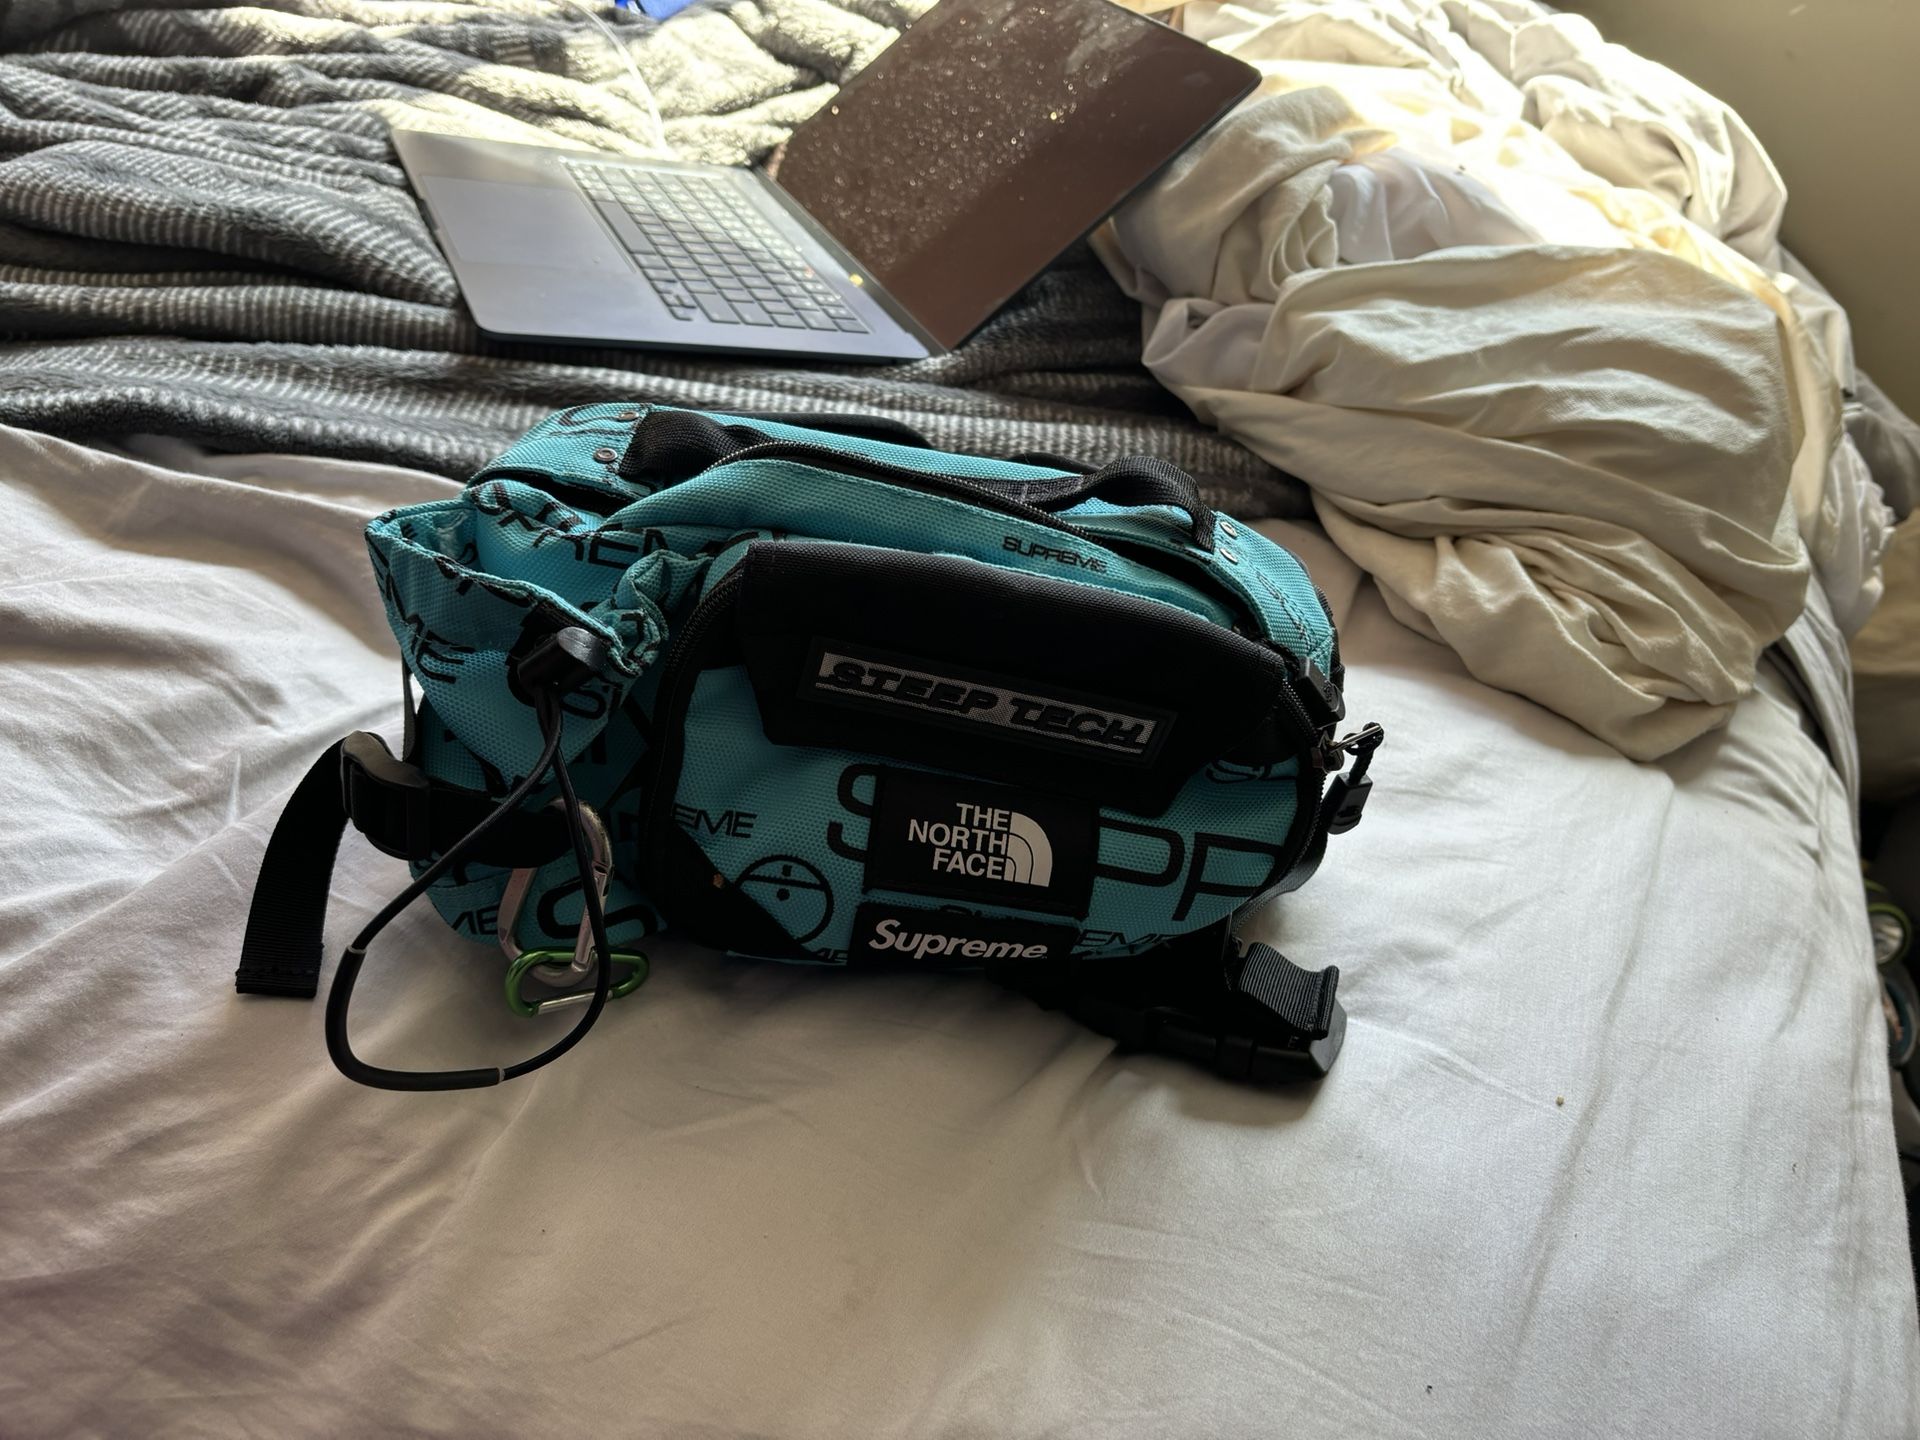 Supreme North face Awesome Fanny Pack 